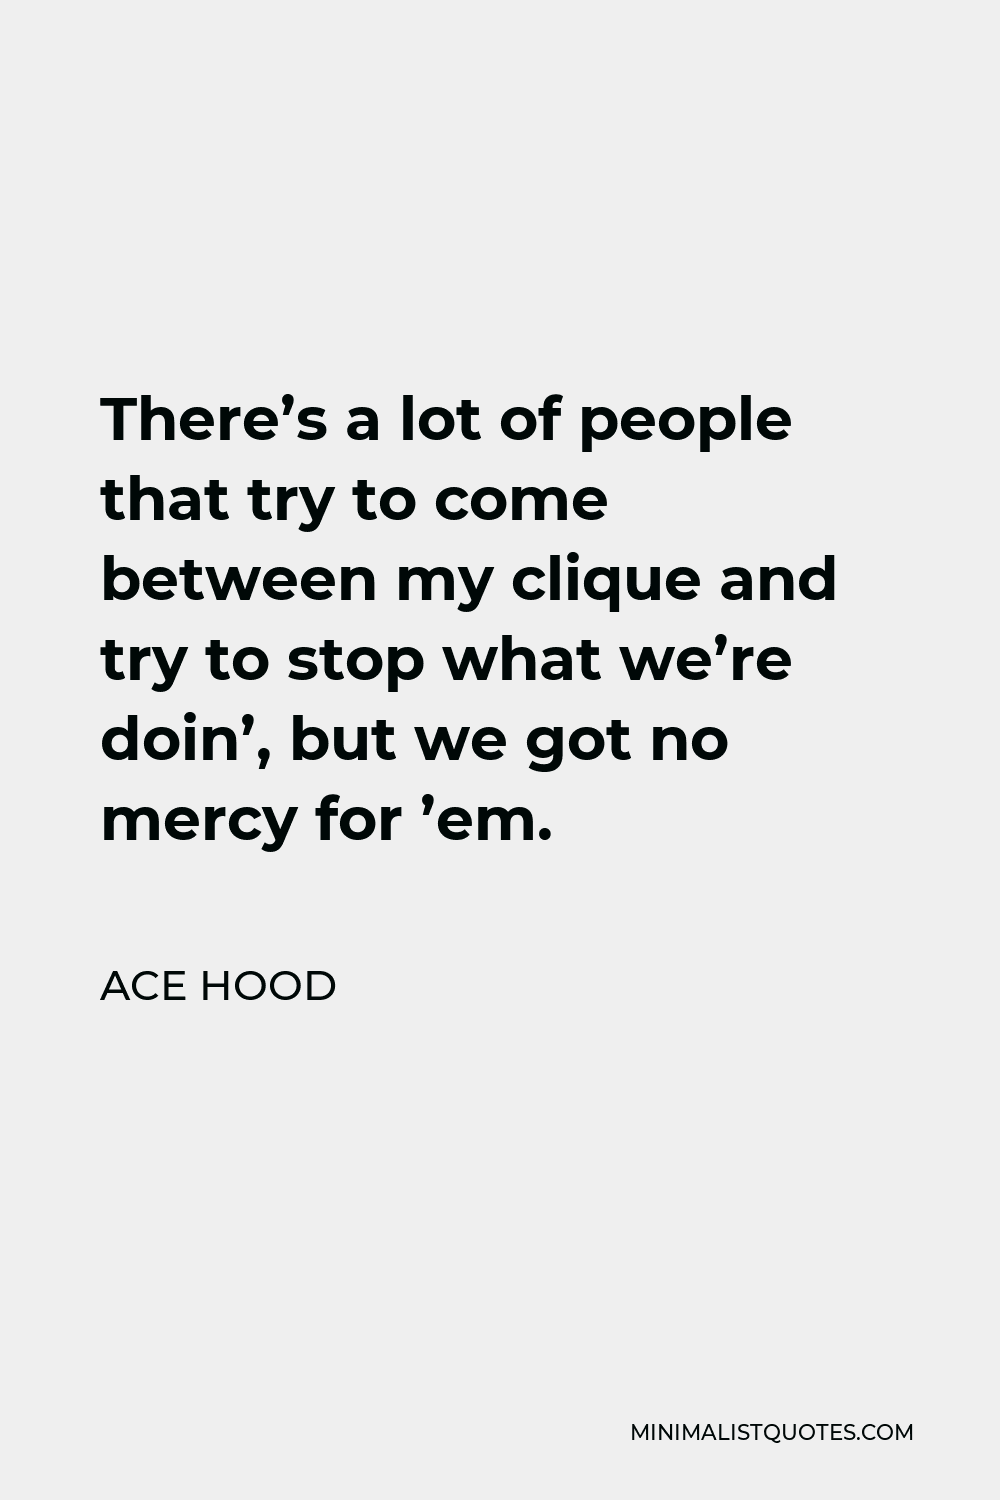 Ace Hood Quote - There’s a lot of people that try to come between my clique and try to stop what we’re doin’, but we got no mercy for ’em.